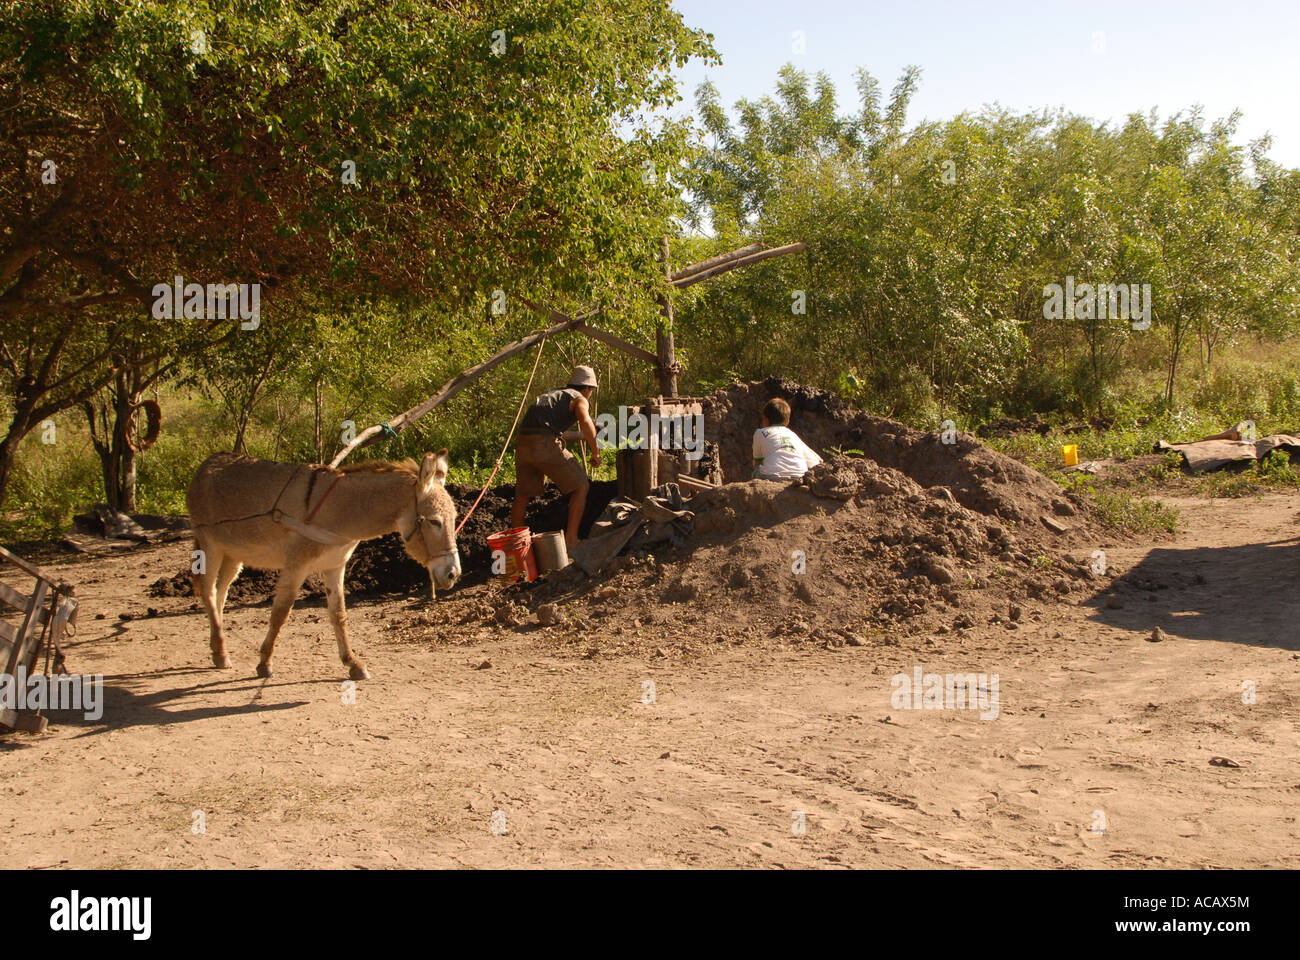 Building a well with donkey's power, Paraguay Stock Photo